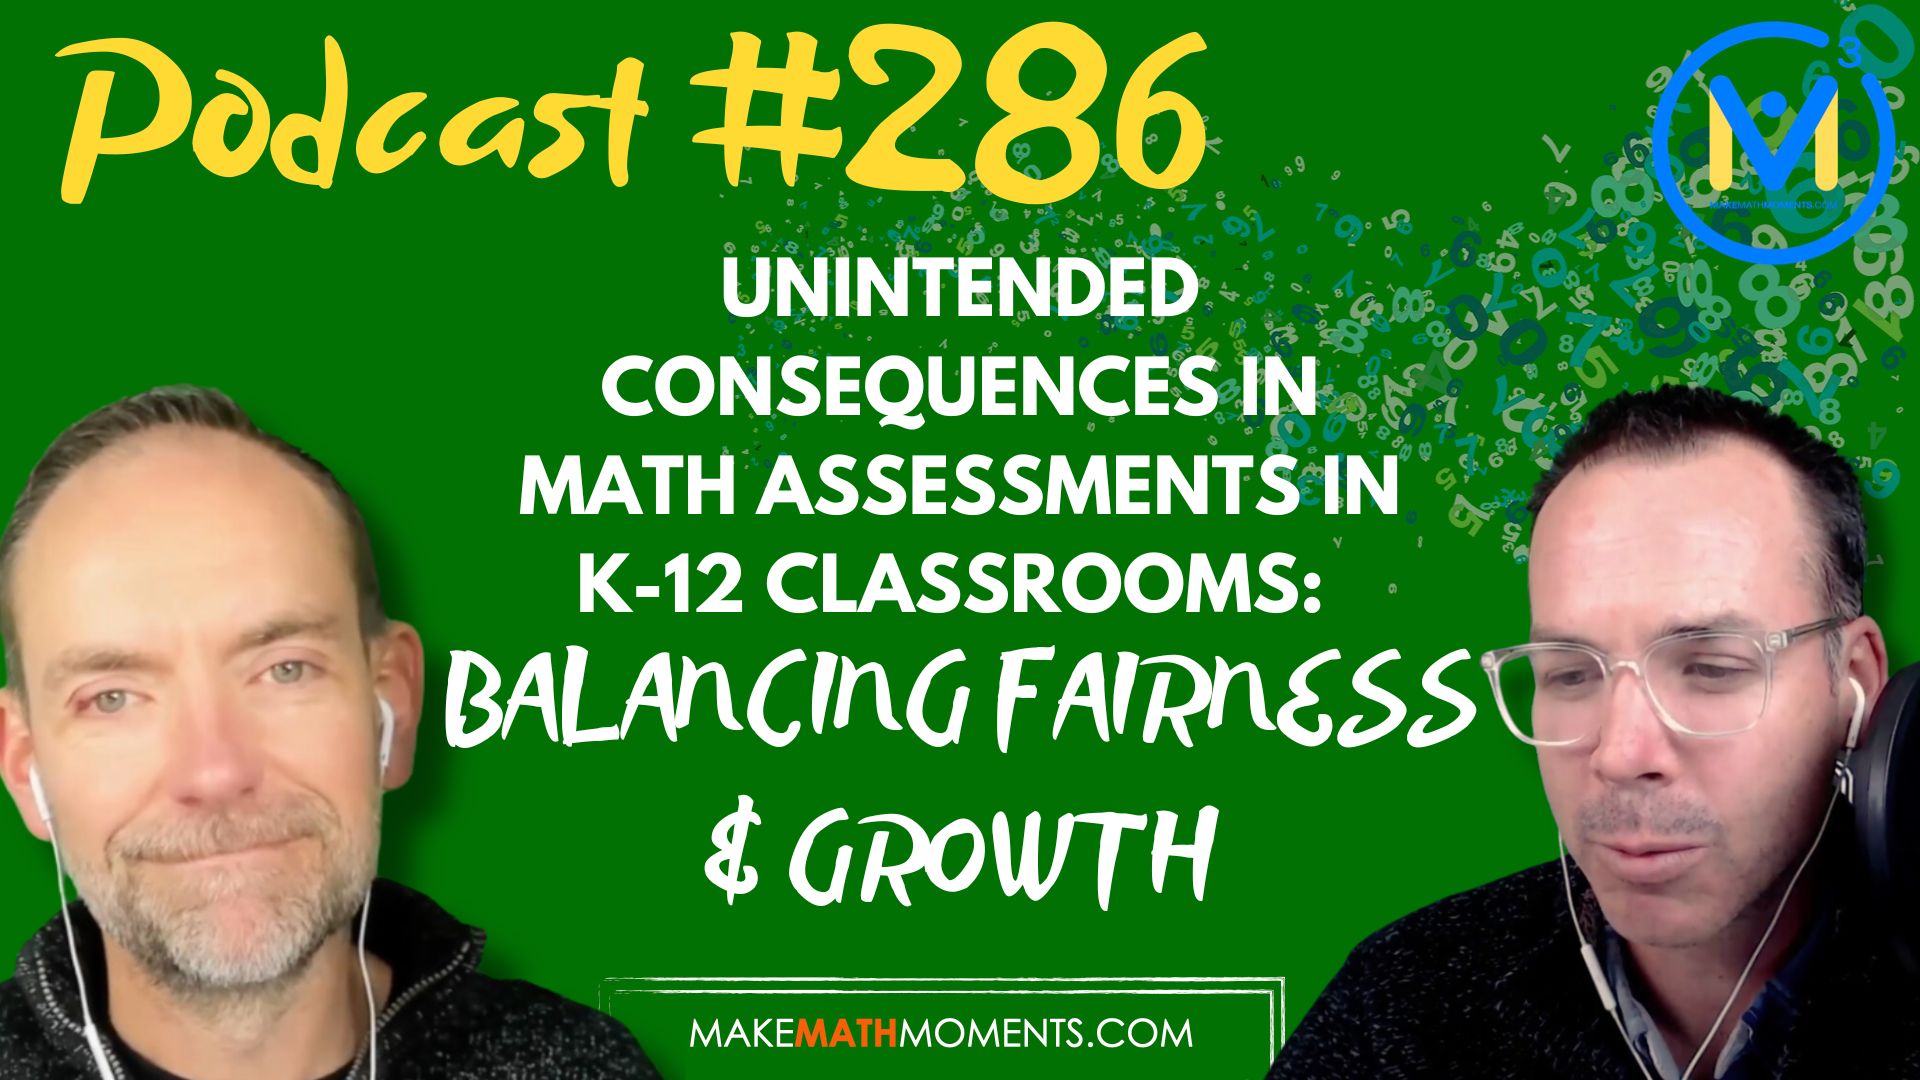 Episode #286: Unintended Consequences in Math Assessments in K-12 Classrooms: Balancing Fairness & Growth